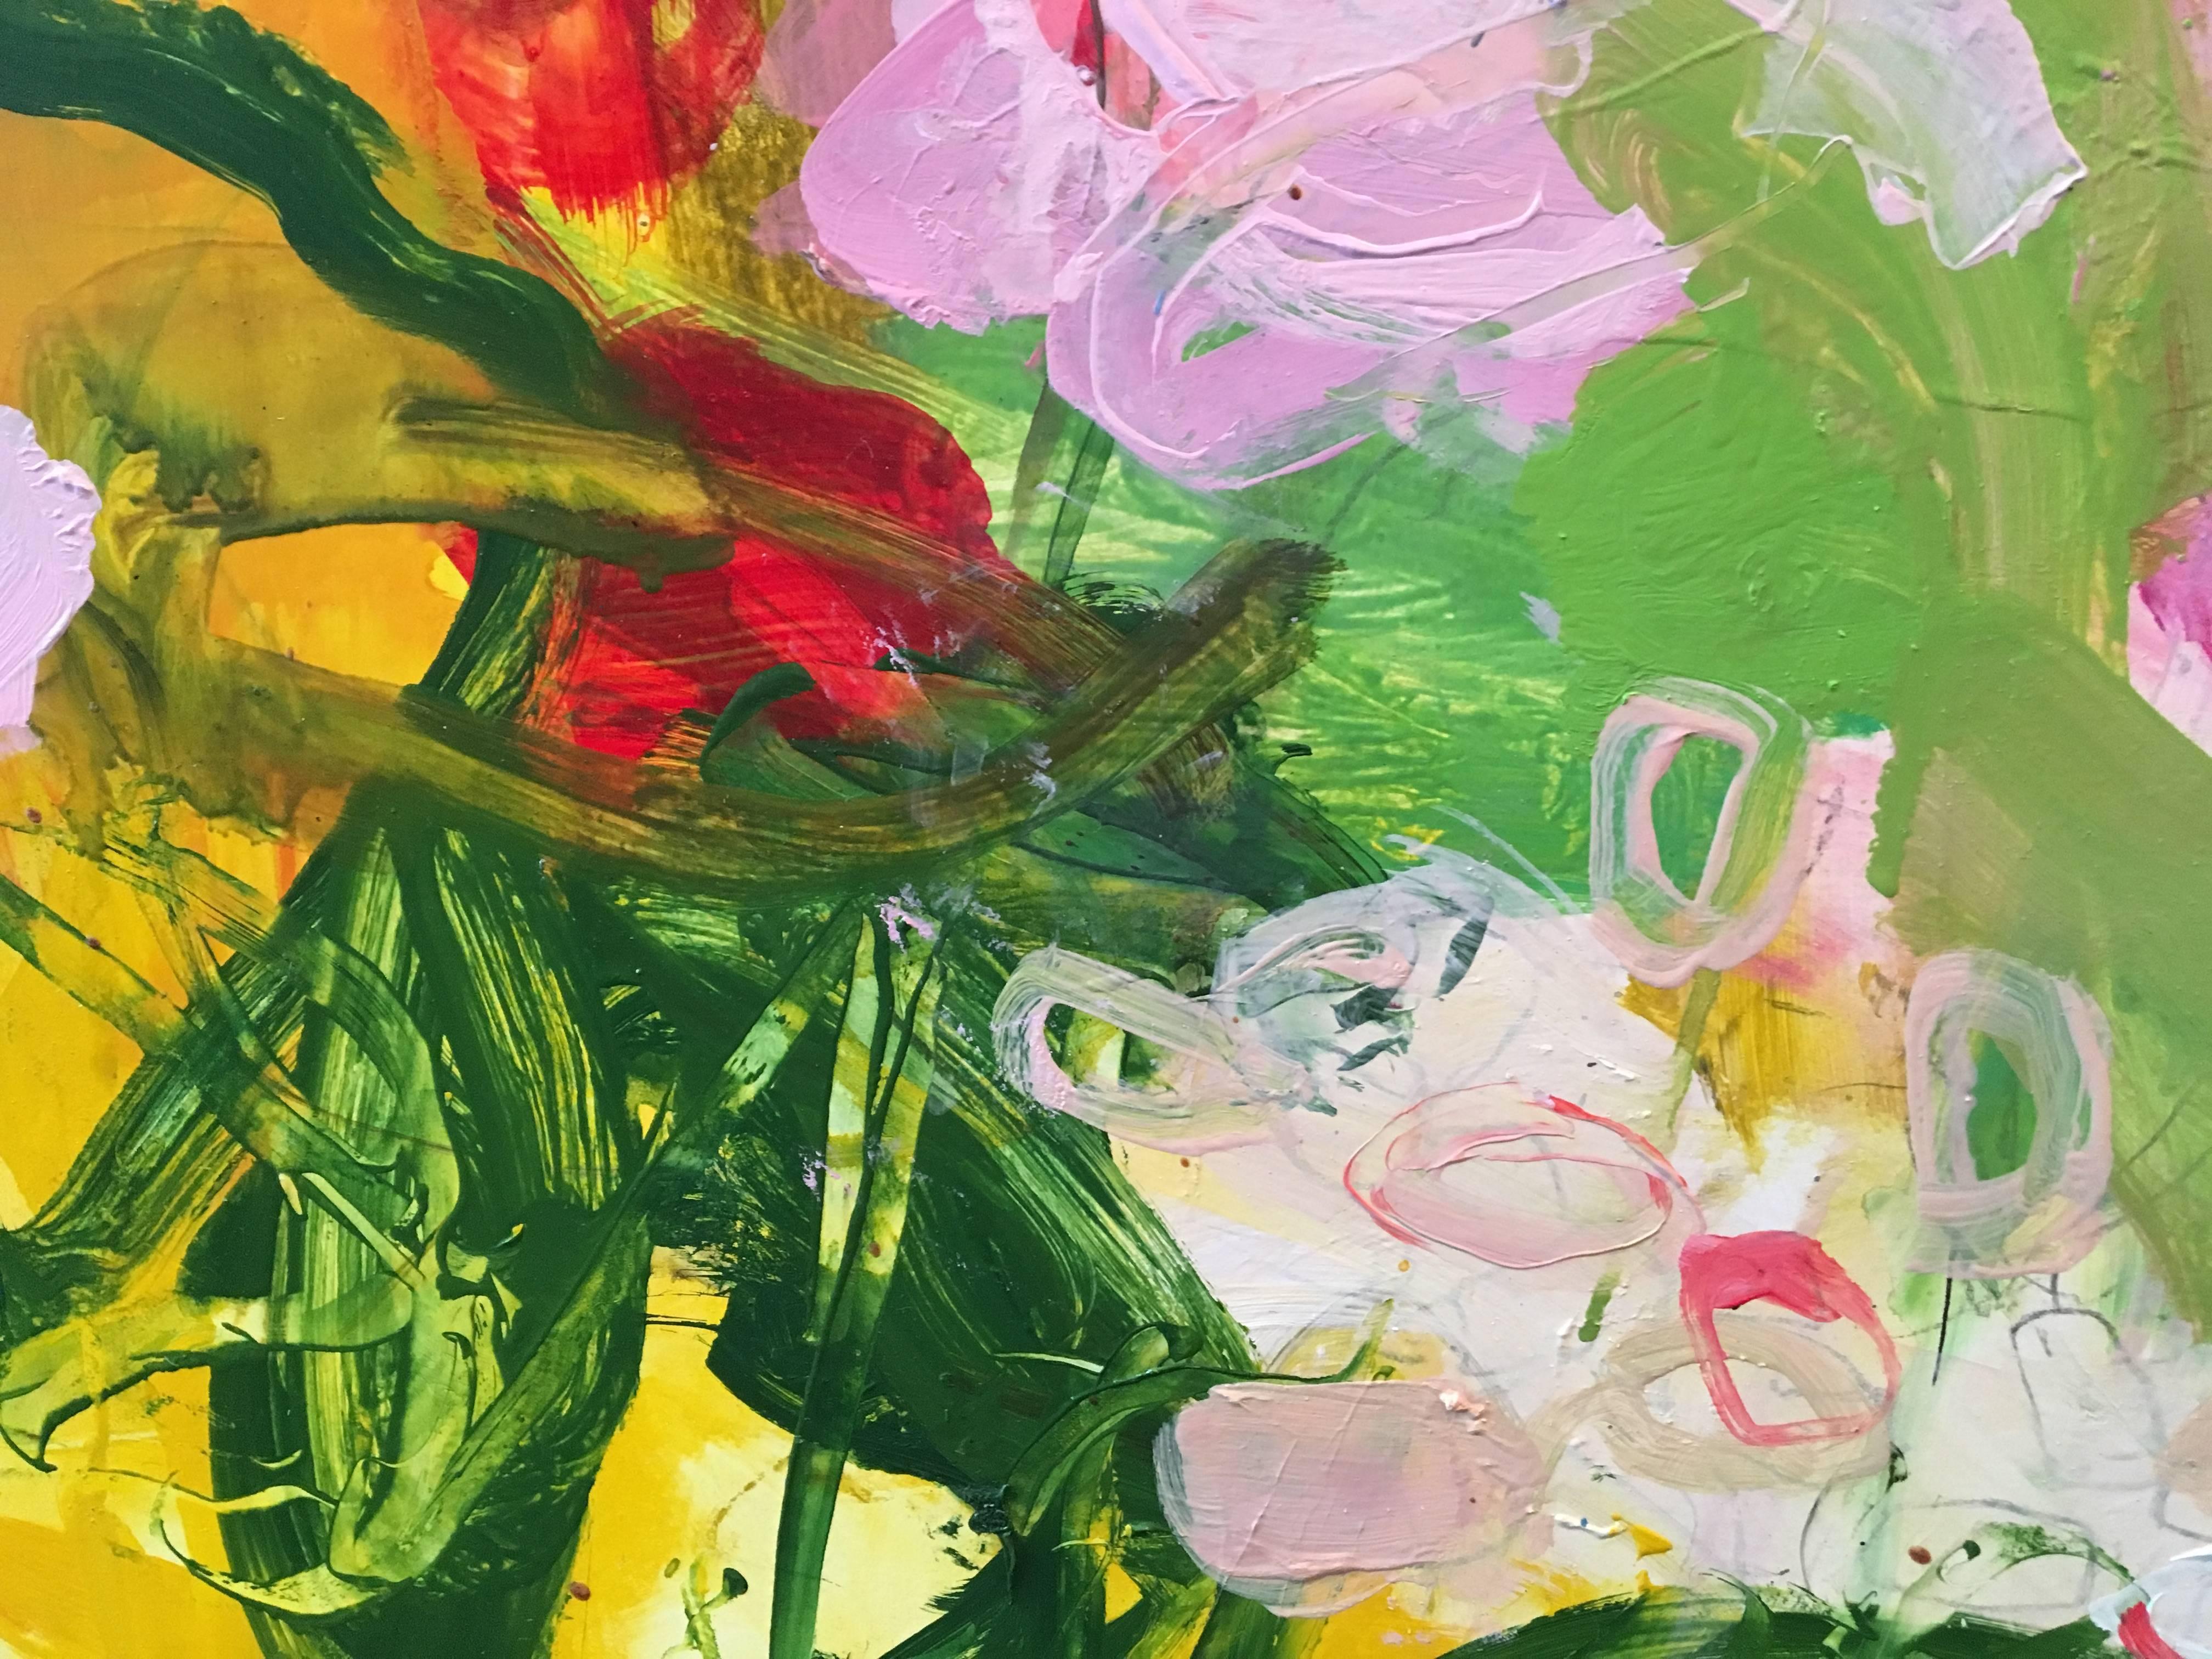 Gorgeous oil on board by Robin Reynolds. Abstract floral with every color imaginable creating a glorious arrangement. 